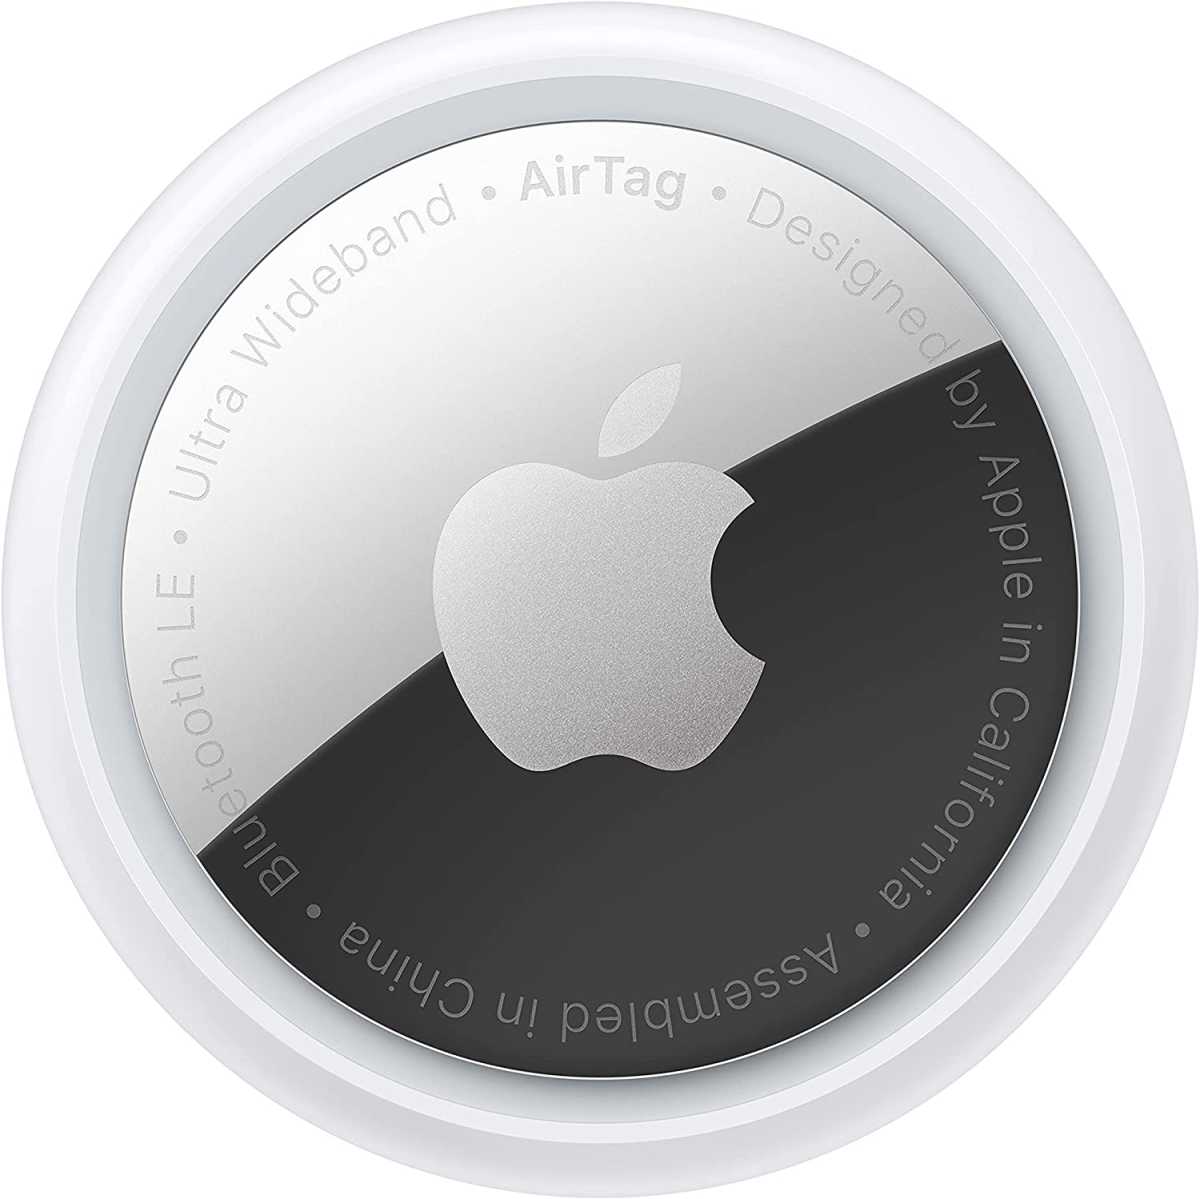 Apple Air Tag Audio Listening Frequency Scanner Detector